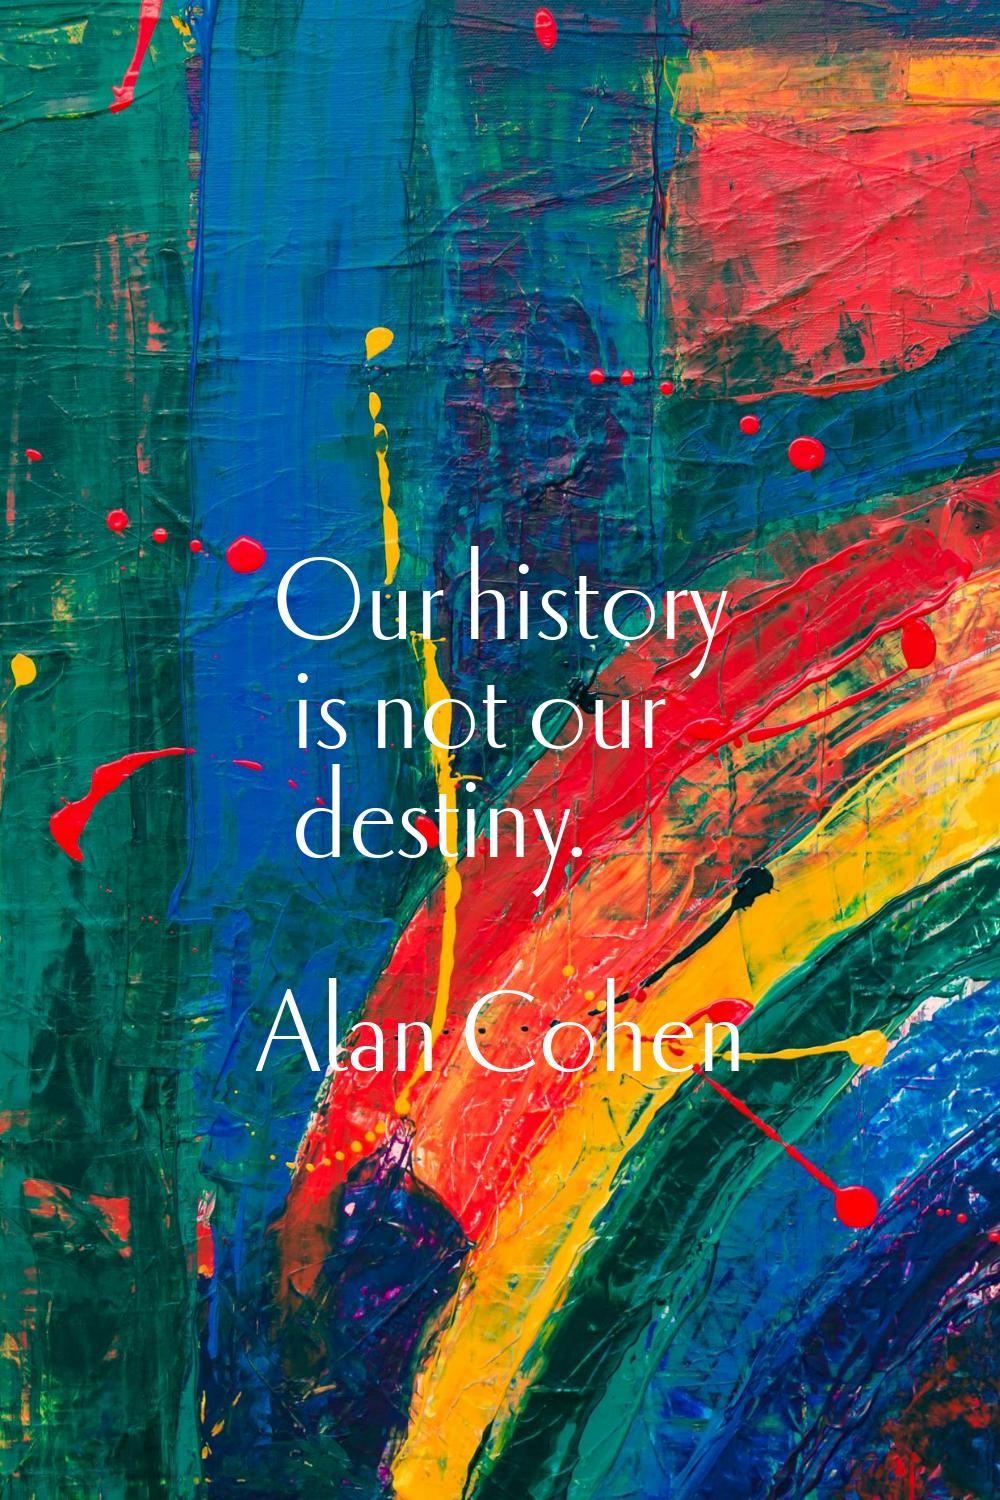 Our history is not our destiny.